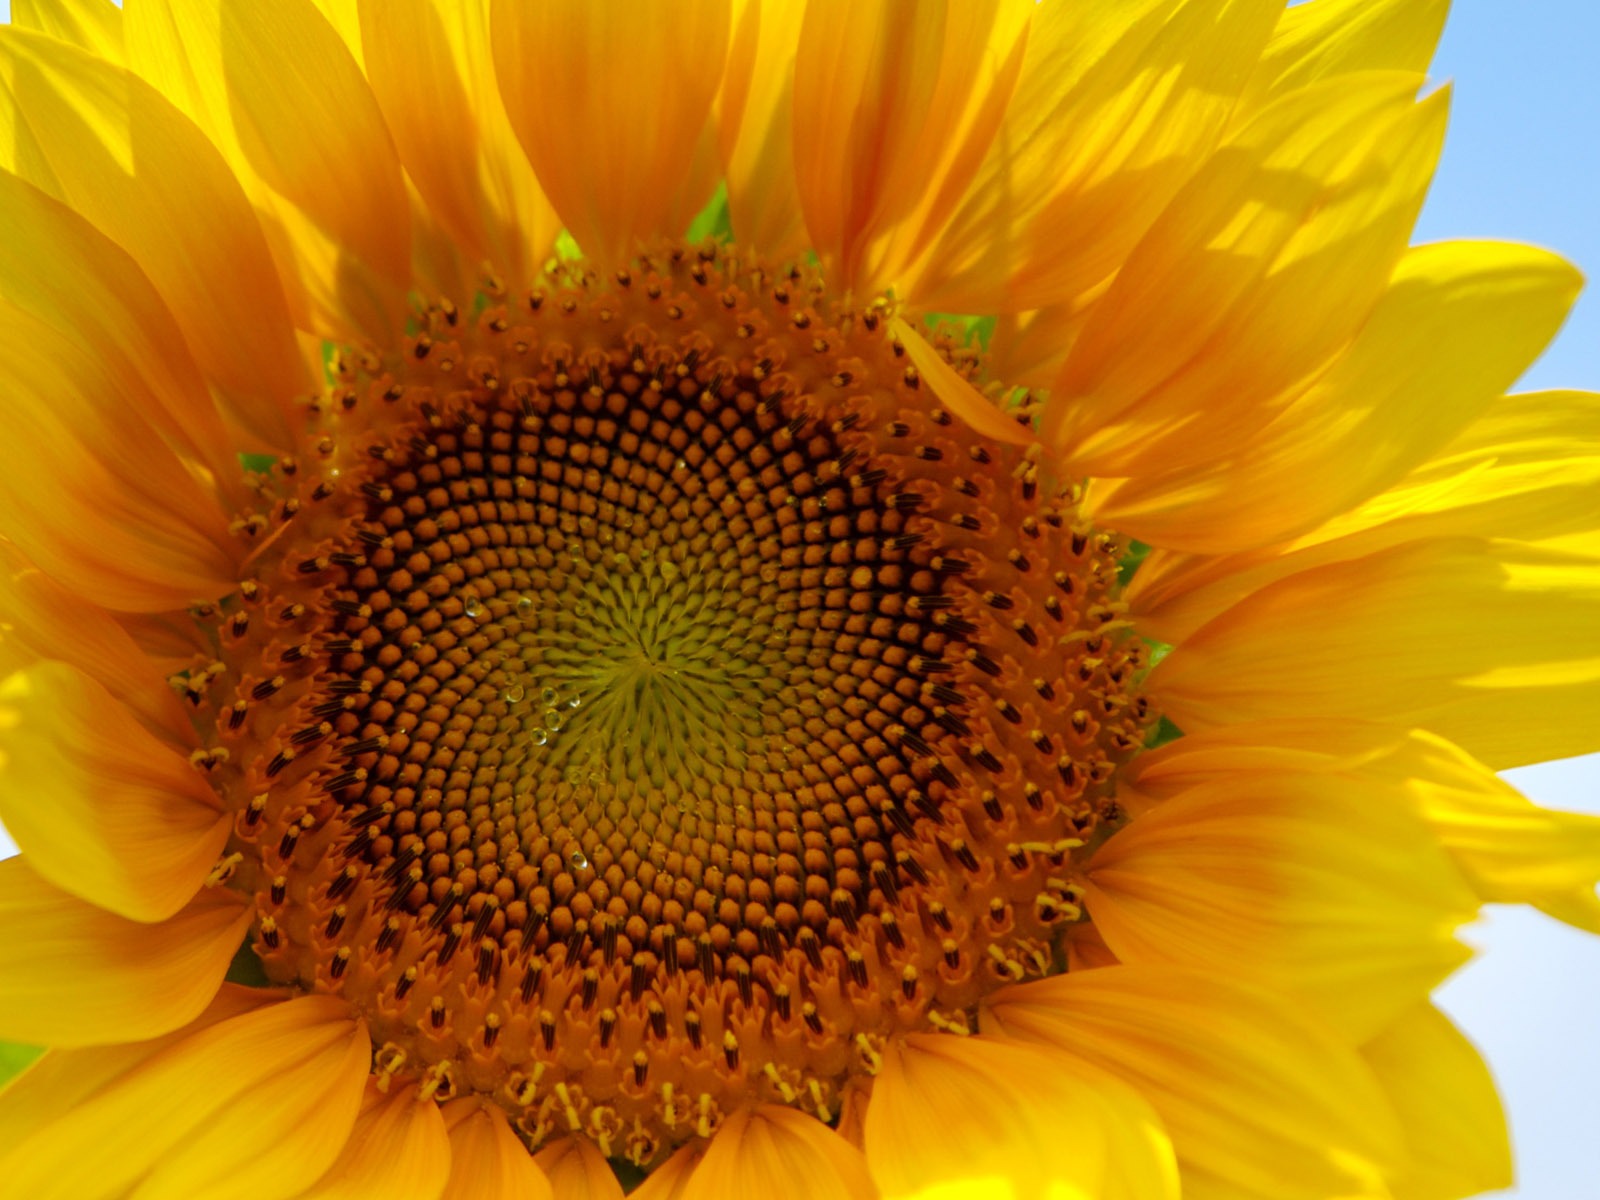 Sunny sunflower photo HD Wallpapers #4 - 1600x1200